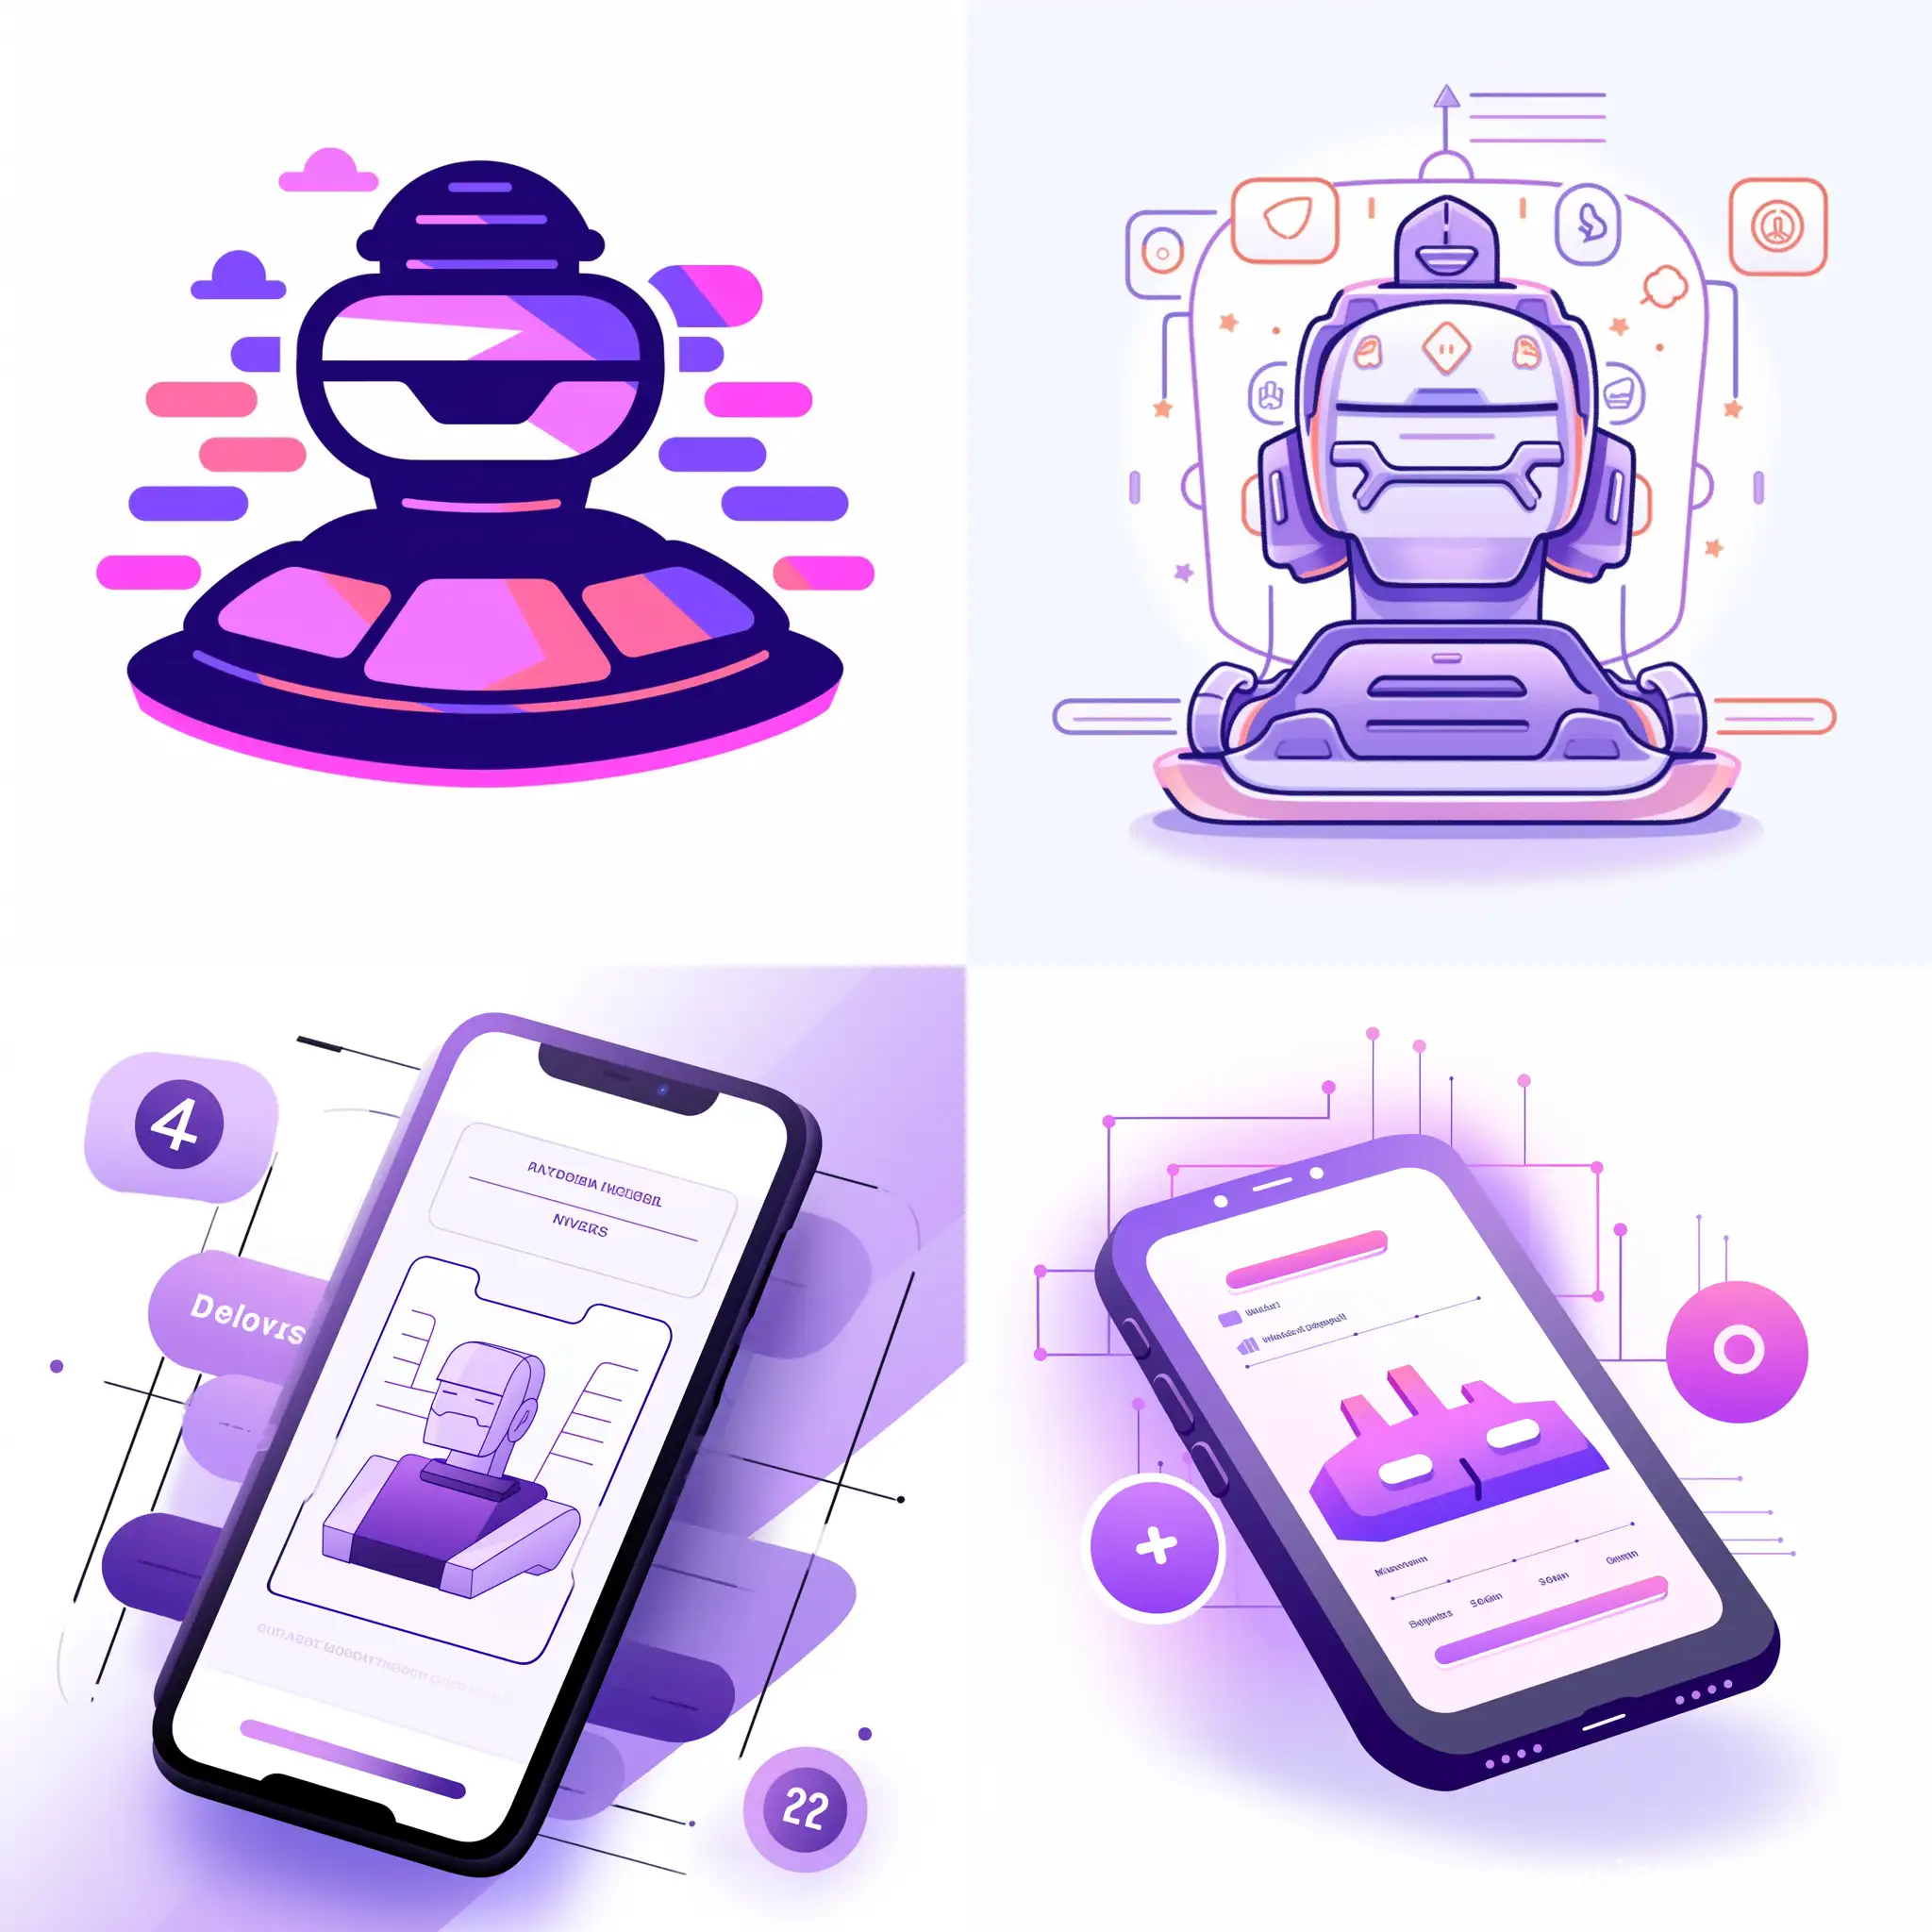 Minimalist-Online-Survey-Robot-Illustration-with-Soft-Lines-and-Gradient-Colors